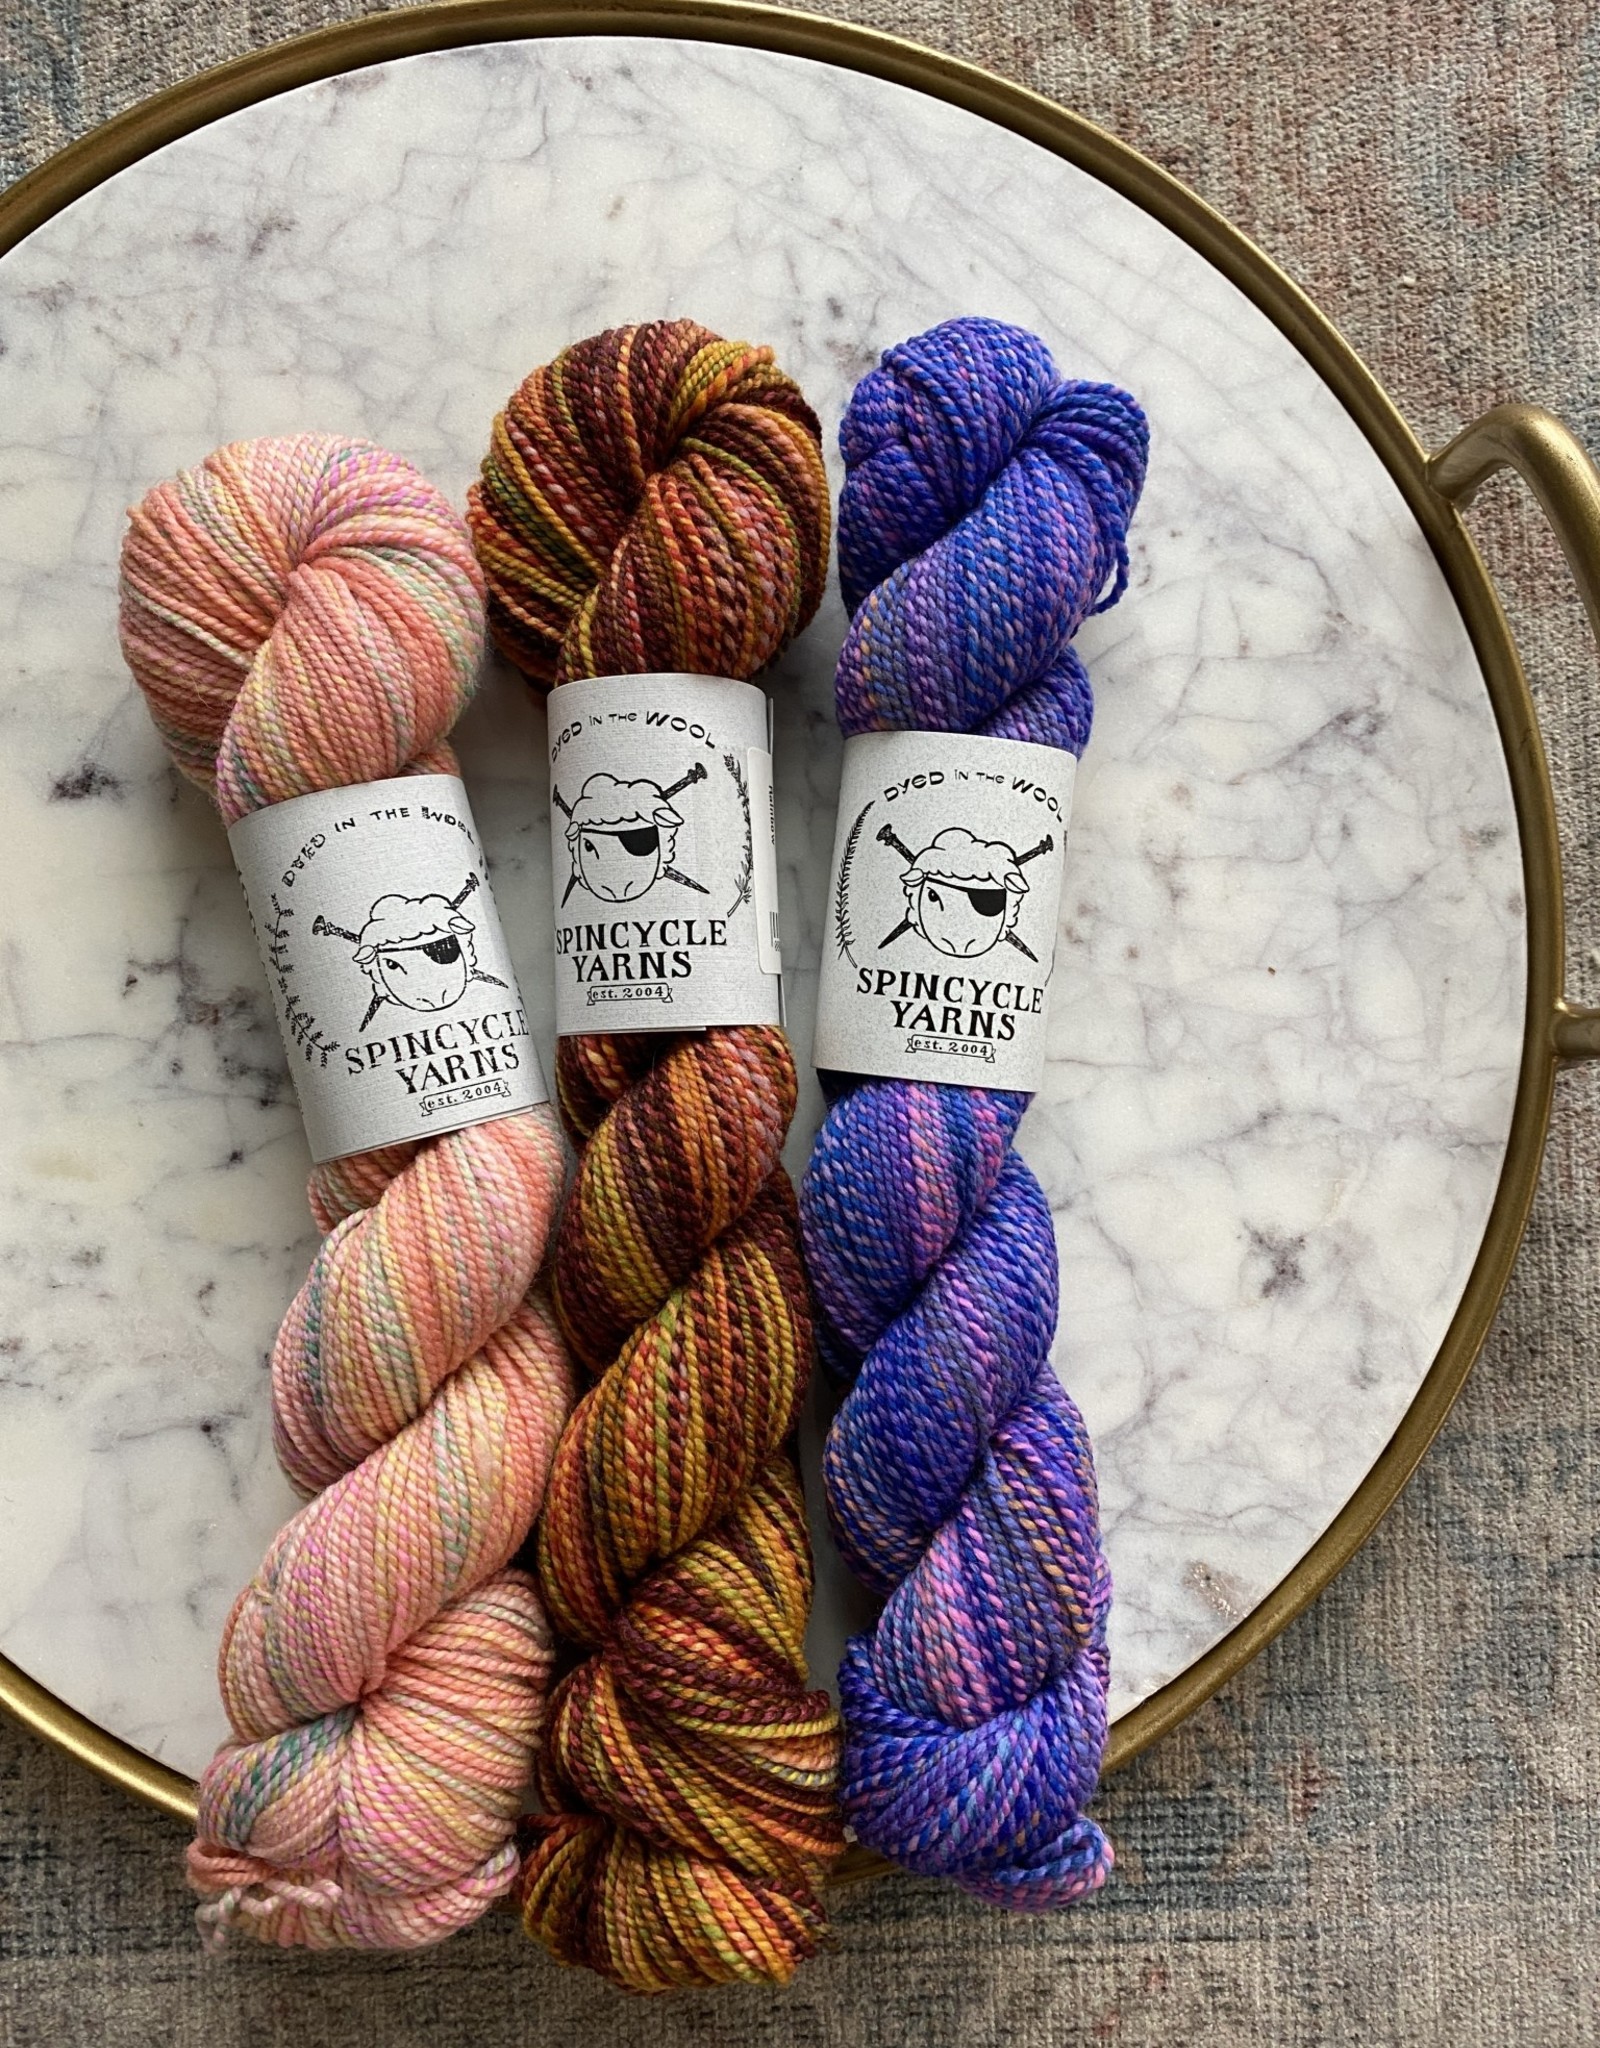 Spincycle Yarns The Shift Kit-Rusted Neon trio